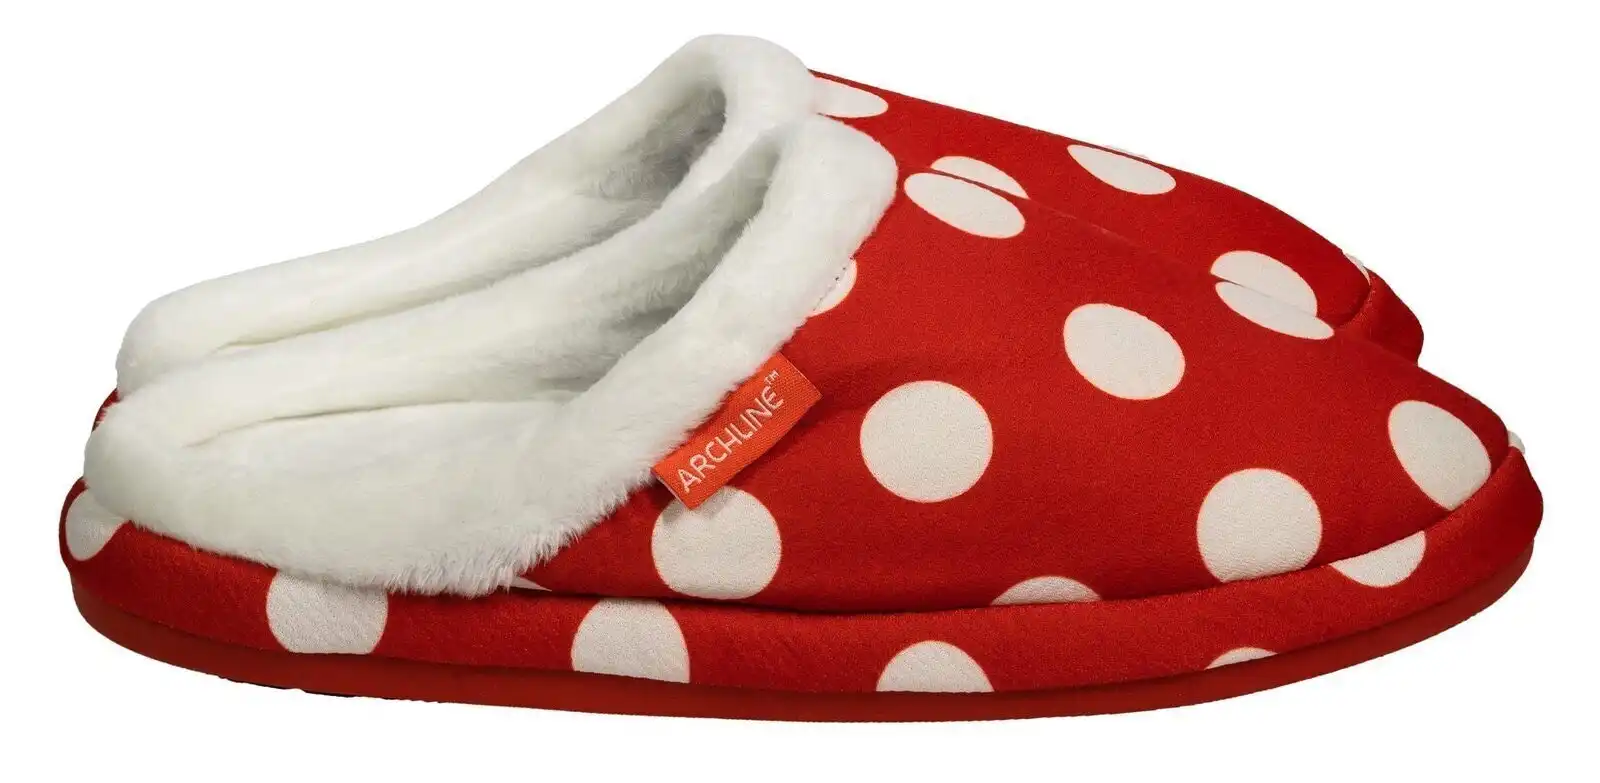 Archline Orthotic Slippers Slip On Scuffs Medical Pain Relief Moccasins - Red Polka Dot